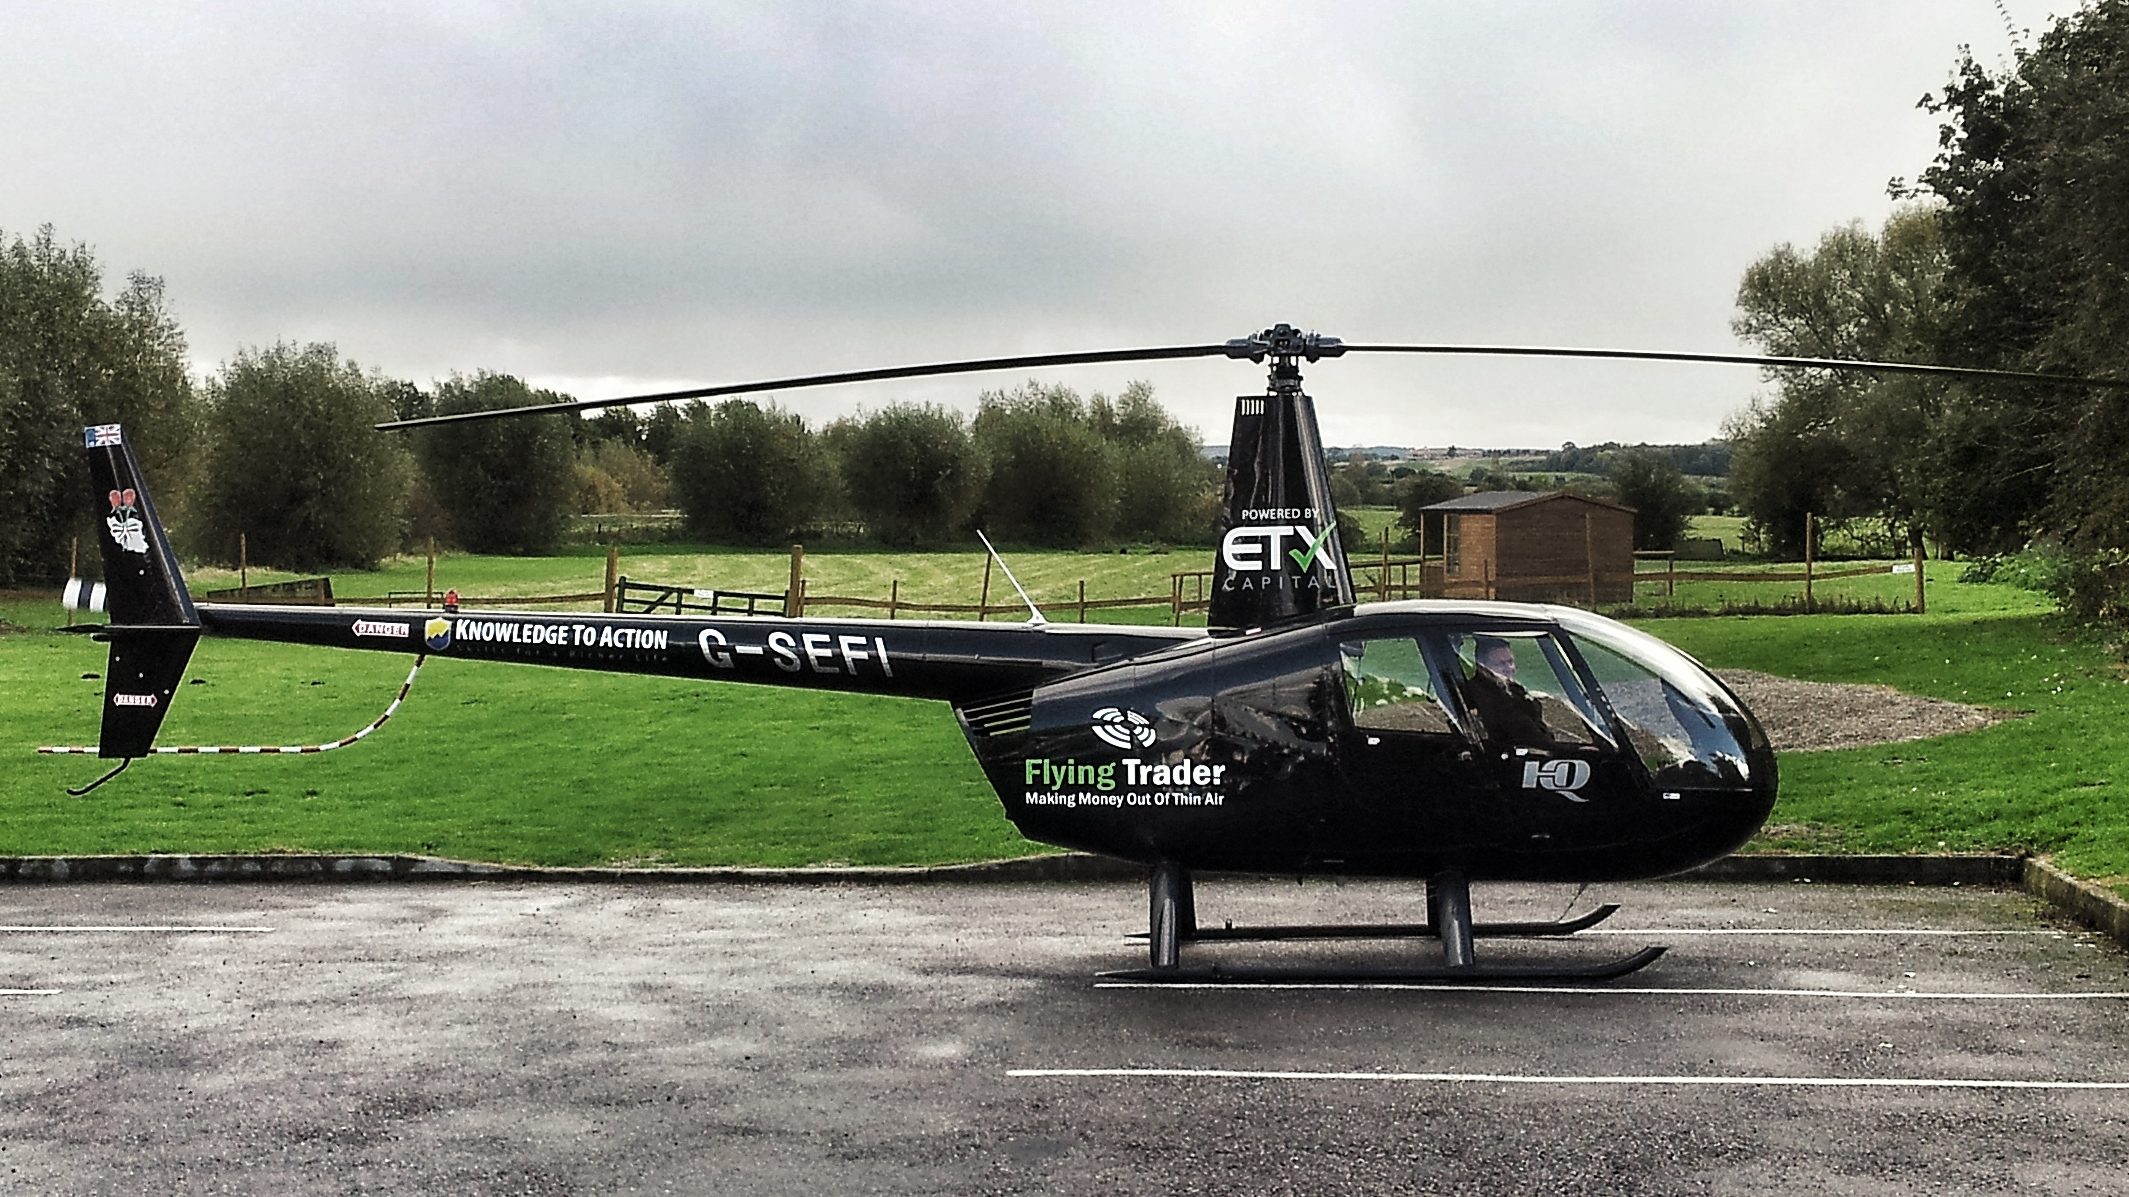 R44 helicopter in car park